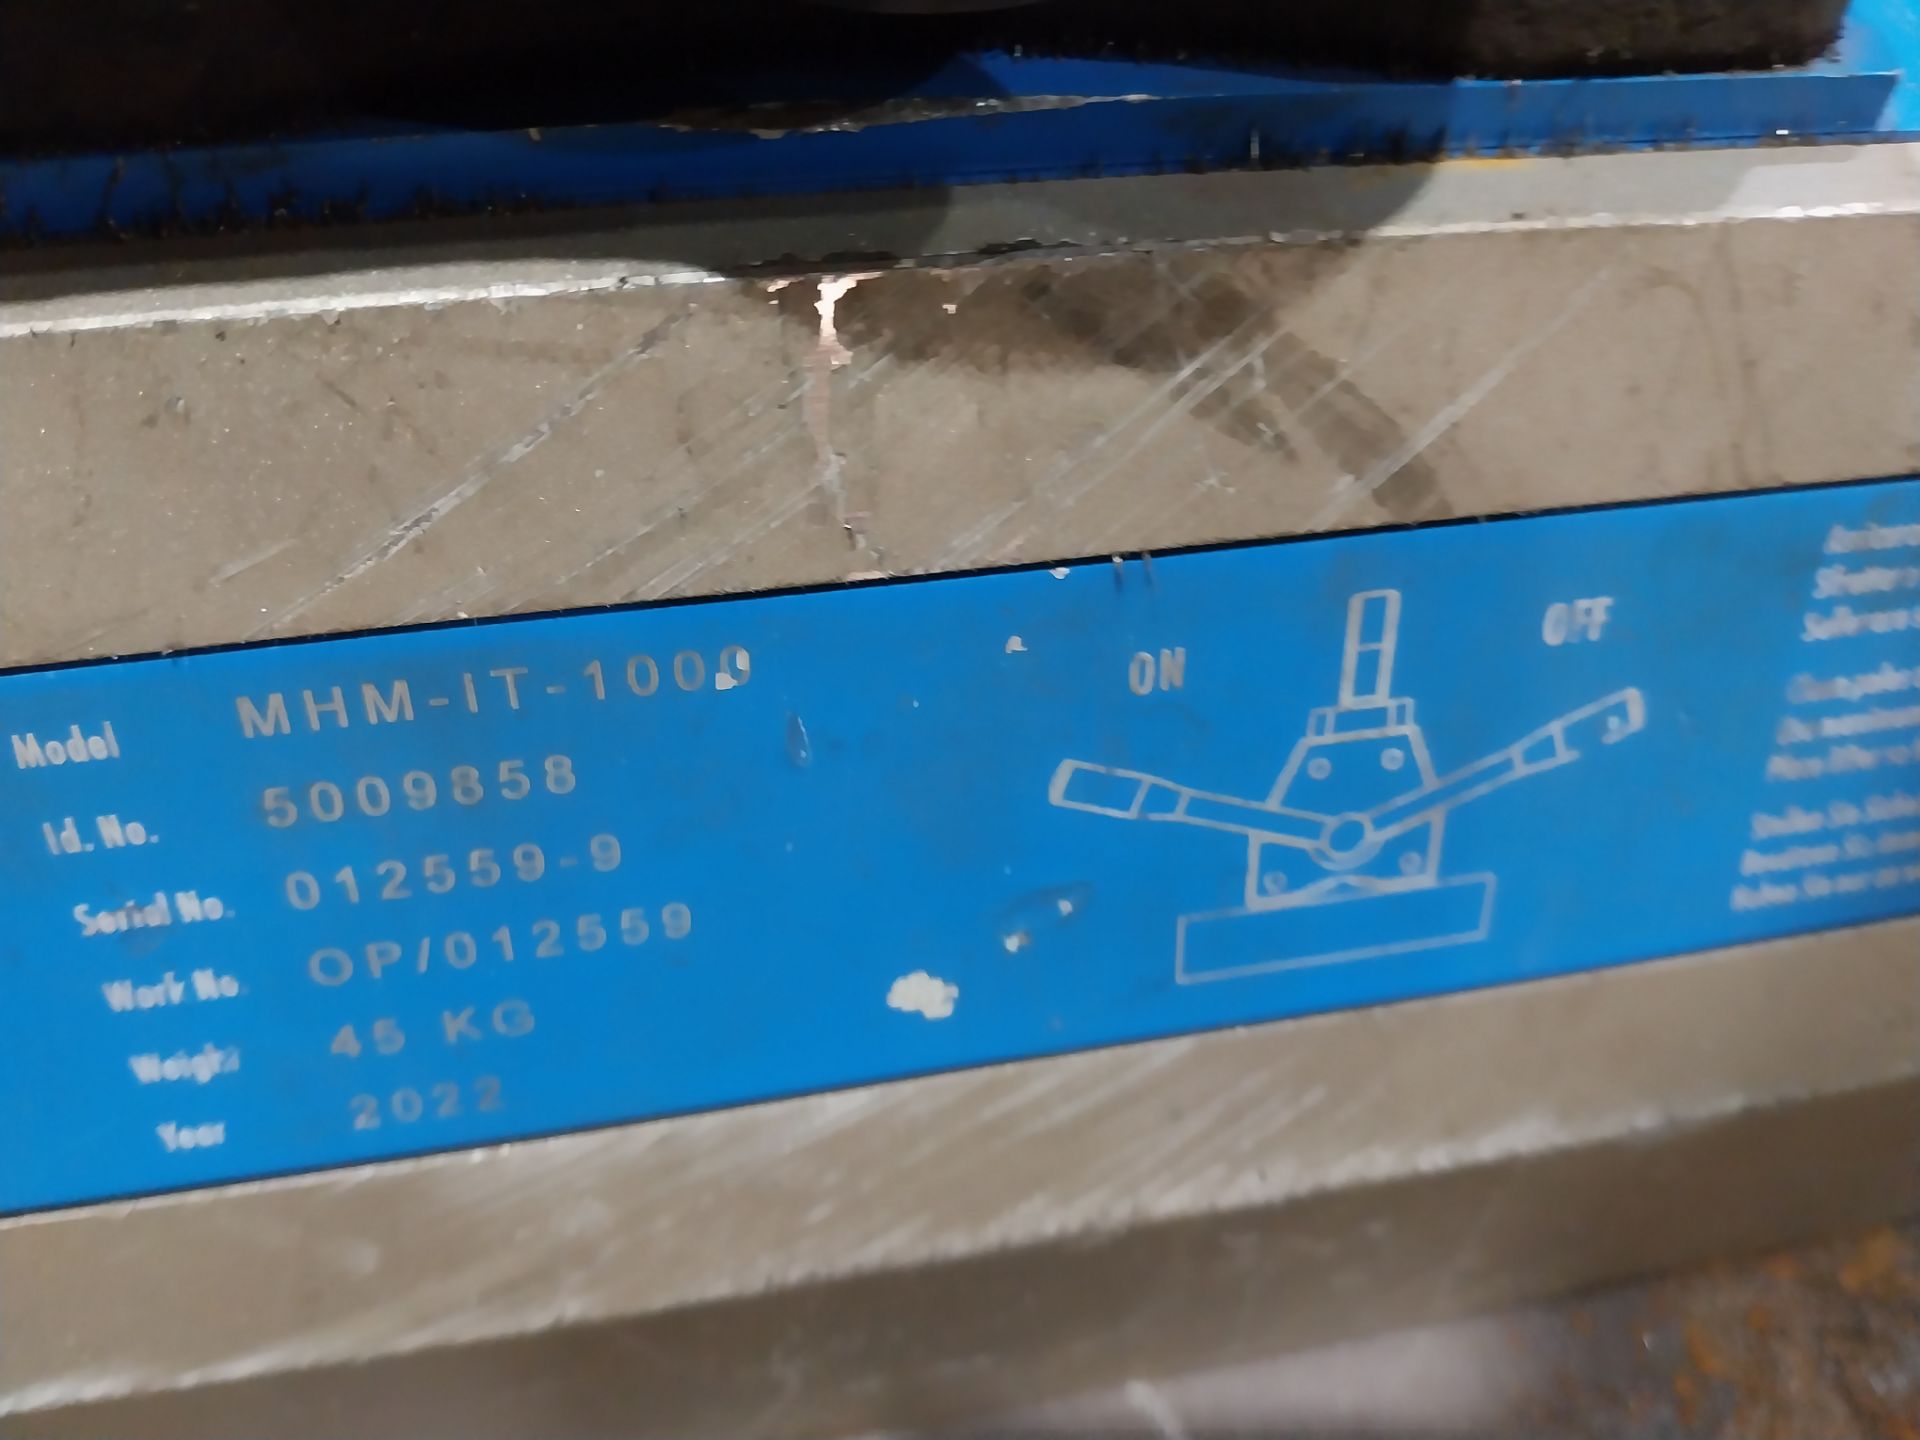 SPD MHM-IT-1000 magnetic neodymium lever lifter Year 2022 - Image 2 of 4